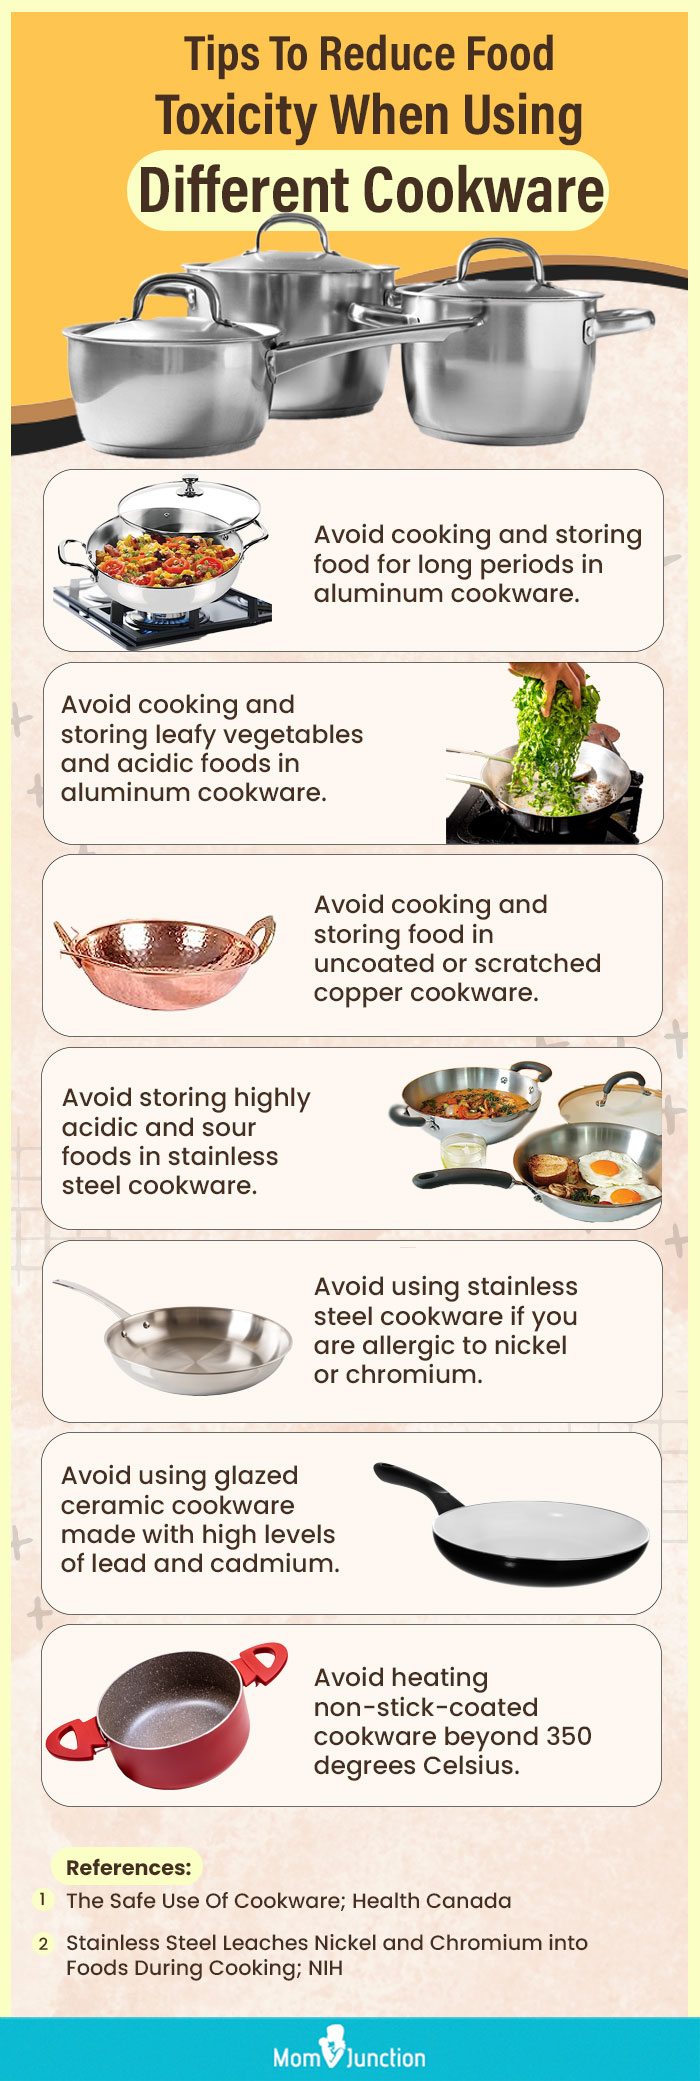 https://www.momjunction.com/wp-content/uploads/2021/06/Tips-To-Reduce-Food-Toxicity-When-Using-Different-Cookware.jpg